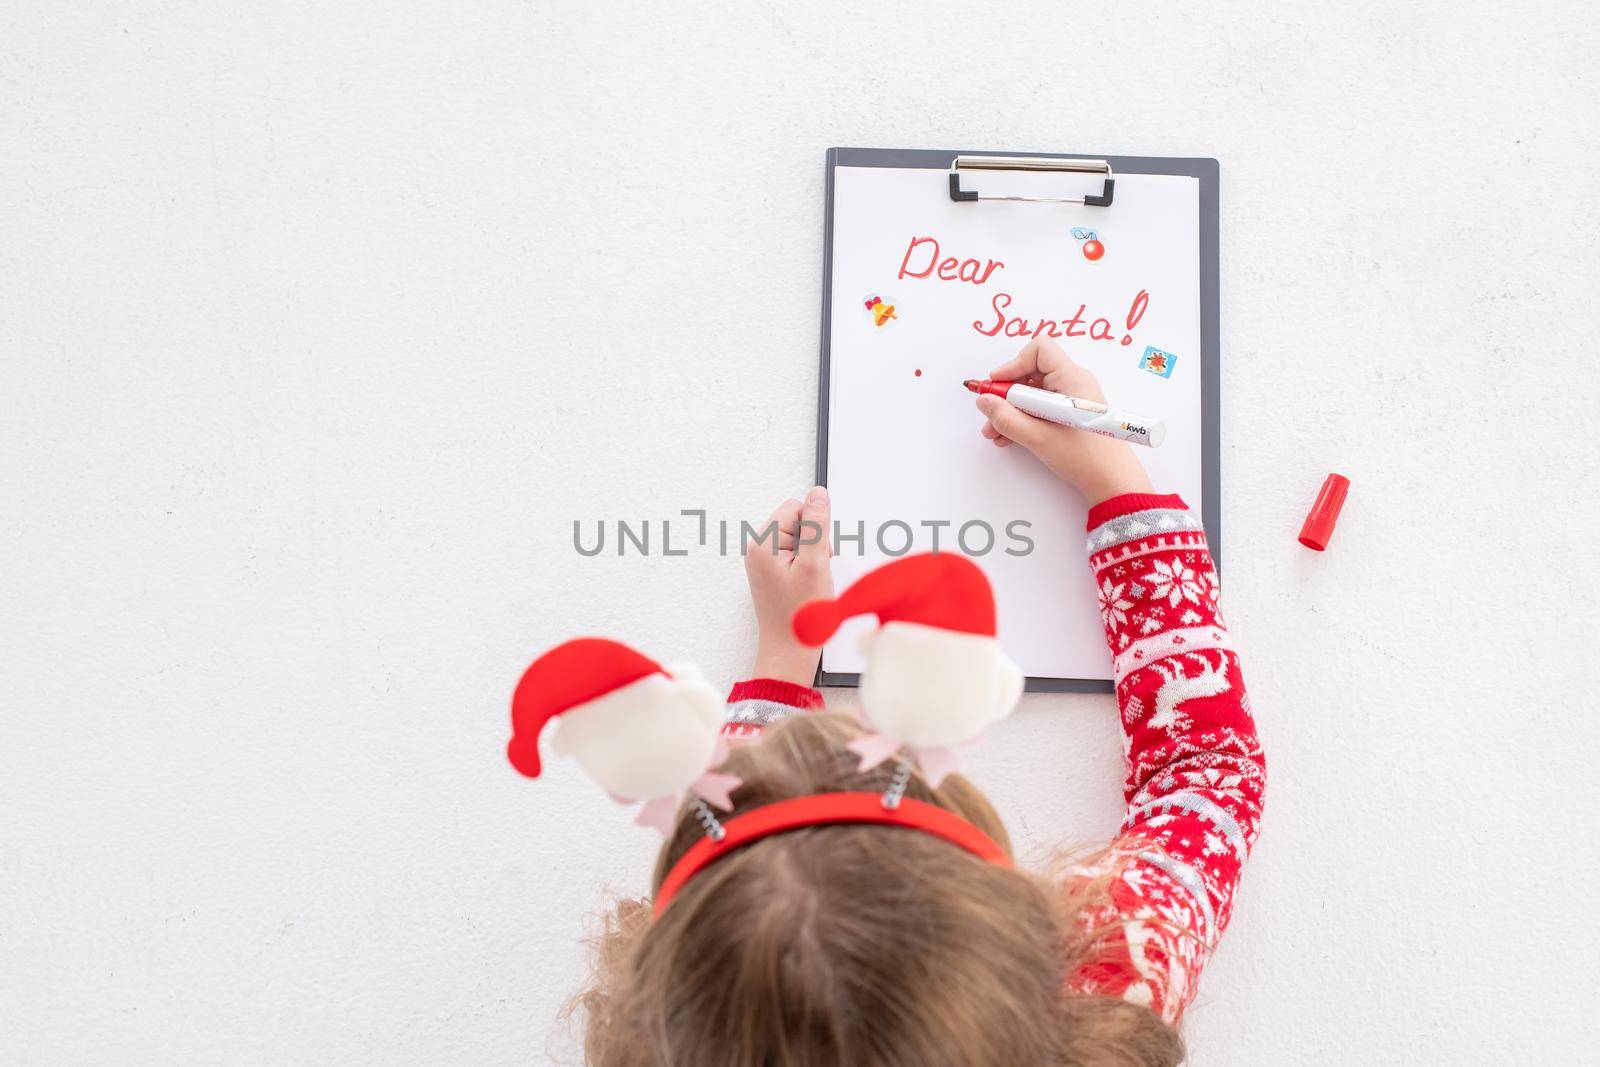 Dear Santa letter, Christmas card. Cute young girl wearing deer horns, holding a pen and writing on a white sheet